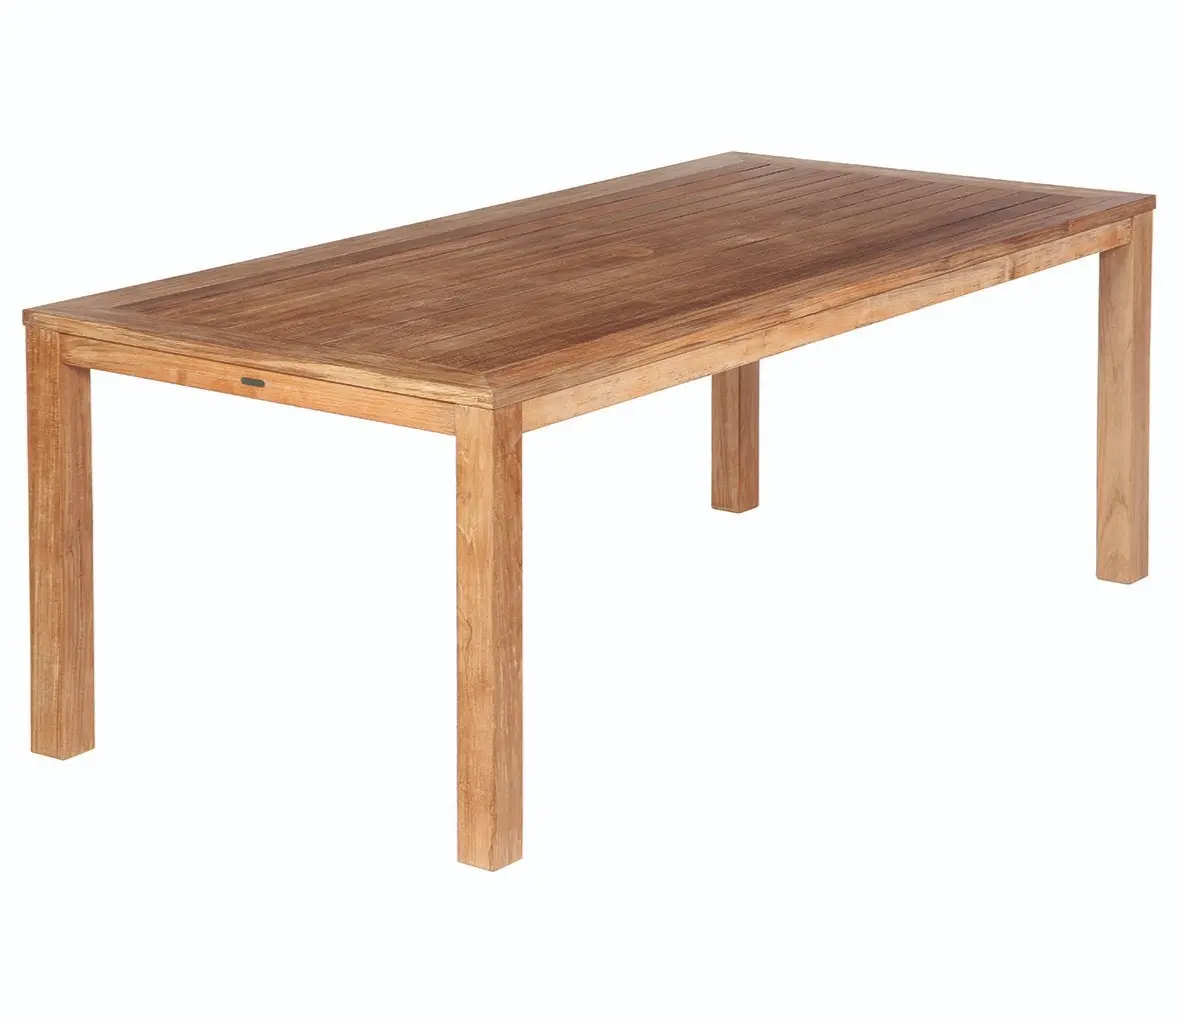 Barlow Tyrie Linear 200cm Dining Table